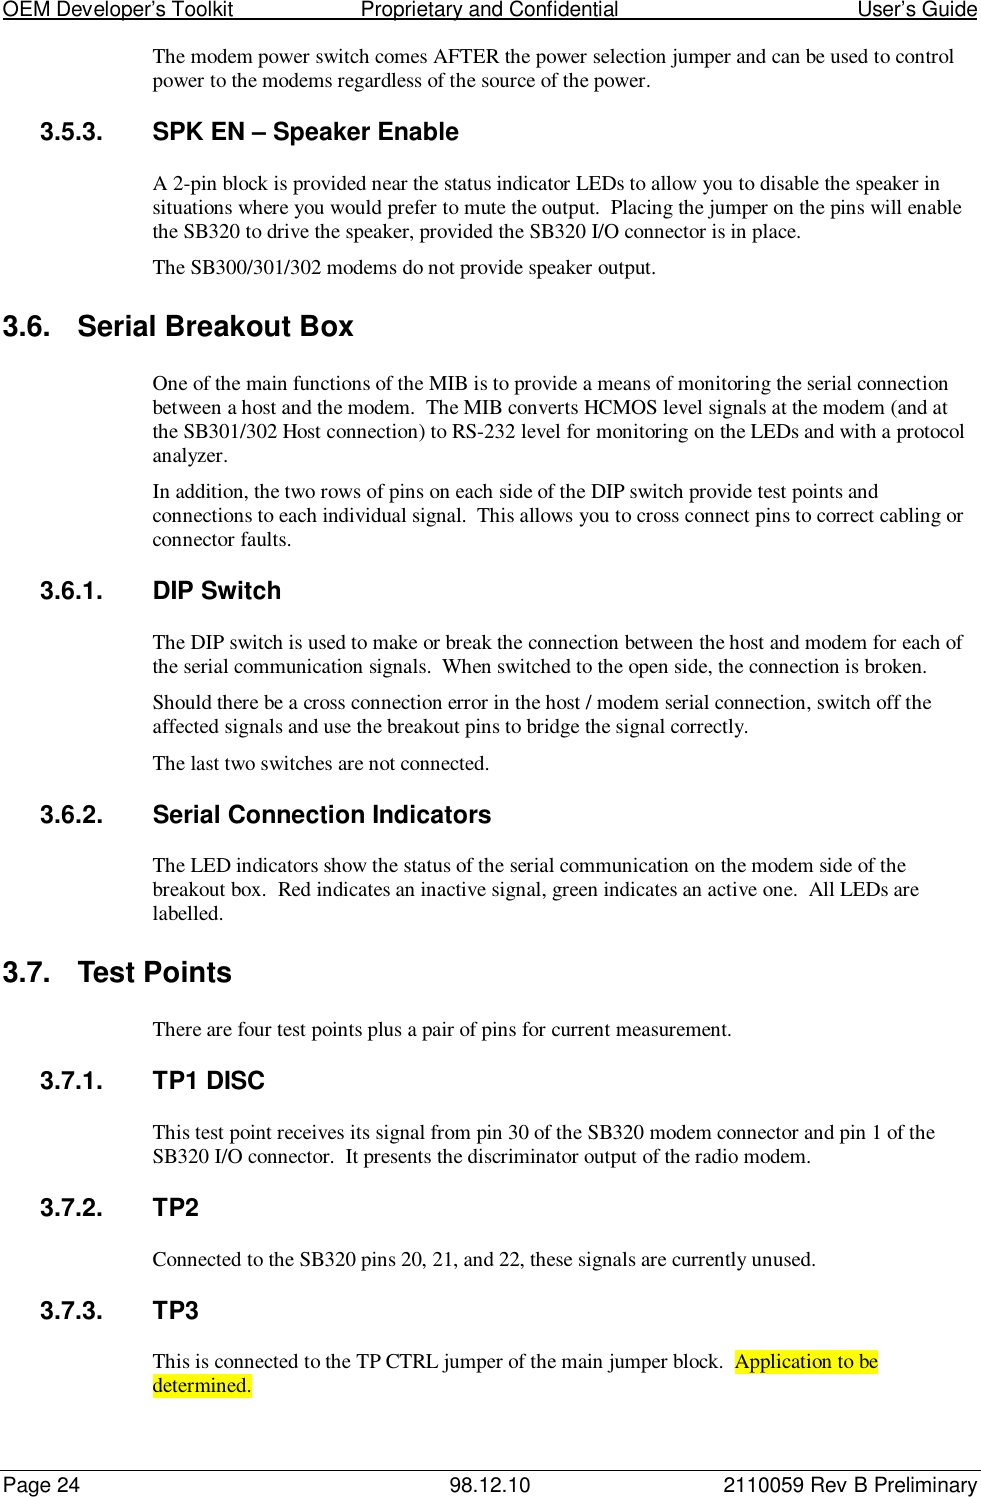 OEM Developer’s Toolkit                        Proprietary and Confidential                                        User’s GuidePage 24 98.12.10 2110059 Rev B PreliminaryThe modem power switch comes AFTER the power selection jumper and can be used to controlpower to the modems regardless of the source of the power.3.5.3.  SPK EN – Speaker EnableA 2-pin block is provided near the status indicator LEDs to allow you to disable the speaker insituations where you would prefer to mute the output.  Placing the jumper on the pins will enablethe SB320 to drive the speaker, provided the SB320 I/O connector is in place.The SB300/301/302 modems do not provide speaker output.3.6.  Serial Breakout BoxOne of the main functions of the MIB is to provide a means of monitoring the serial connectionbetween a host and the modem.  The MIB converts HCMOS level signals at the modem (and atthe SB301/302 Host connection) to RS-232 level for monitoring on the LEDs and with a protocolanalyzer.In addition, the two rows of pins on each side of the DIP switch provide test points andconnections to each individual signal.  This allows you to cross connect pins to correct cabling orconnector faults.3.6.1. DIP SwitchThe DIP switch is used to make or break the connection between the host and modem for each ofthe serial communication signals.  When switched to the open side, the connection is broken.Should there be a cross connection error in the host / modem serial connection, switch off theaffected signals and use the breakout pins to bridge the signal correctly.The last two switches are not connected.3.6.2.  Serial Connection IndicatorsThe LED indicators show the status of the serial communication on the modem side of thebreakout box.  Red indicates an inactive signal, green indicates an active one.  All LEDs arelabelled.3.7.  Test PointsThere are four test points plus a pair of pins for current measurement.3.7.1. TP1 DISCThis test point receives its signal from pin 30 of the SB320 modem connector and pin 1 of theSB320 I/O connector.  It presents the discriminator output of the radio modem.3.7.2. TP2Connected to the SB320 pins 20, 21, and 22, these signals are currently unused.3.7.3. TP3This is connected to the TP CTRL jumper of the main jumper block.  Application to bedetermined.